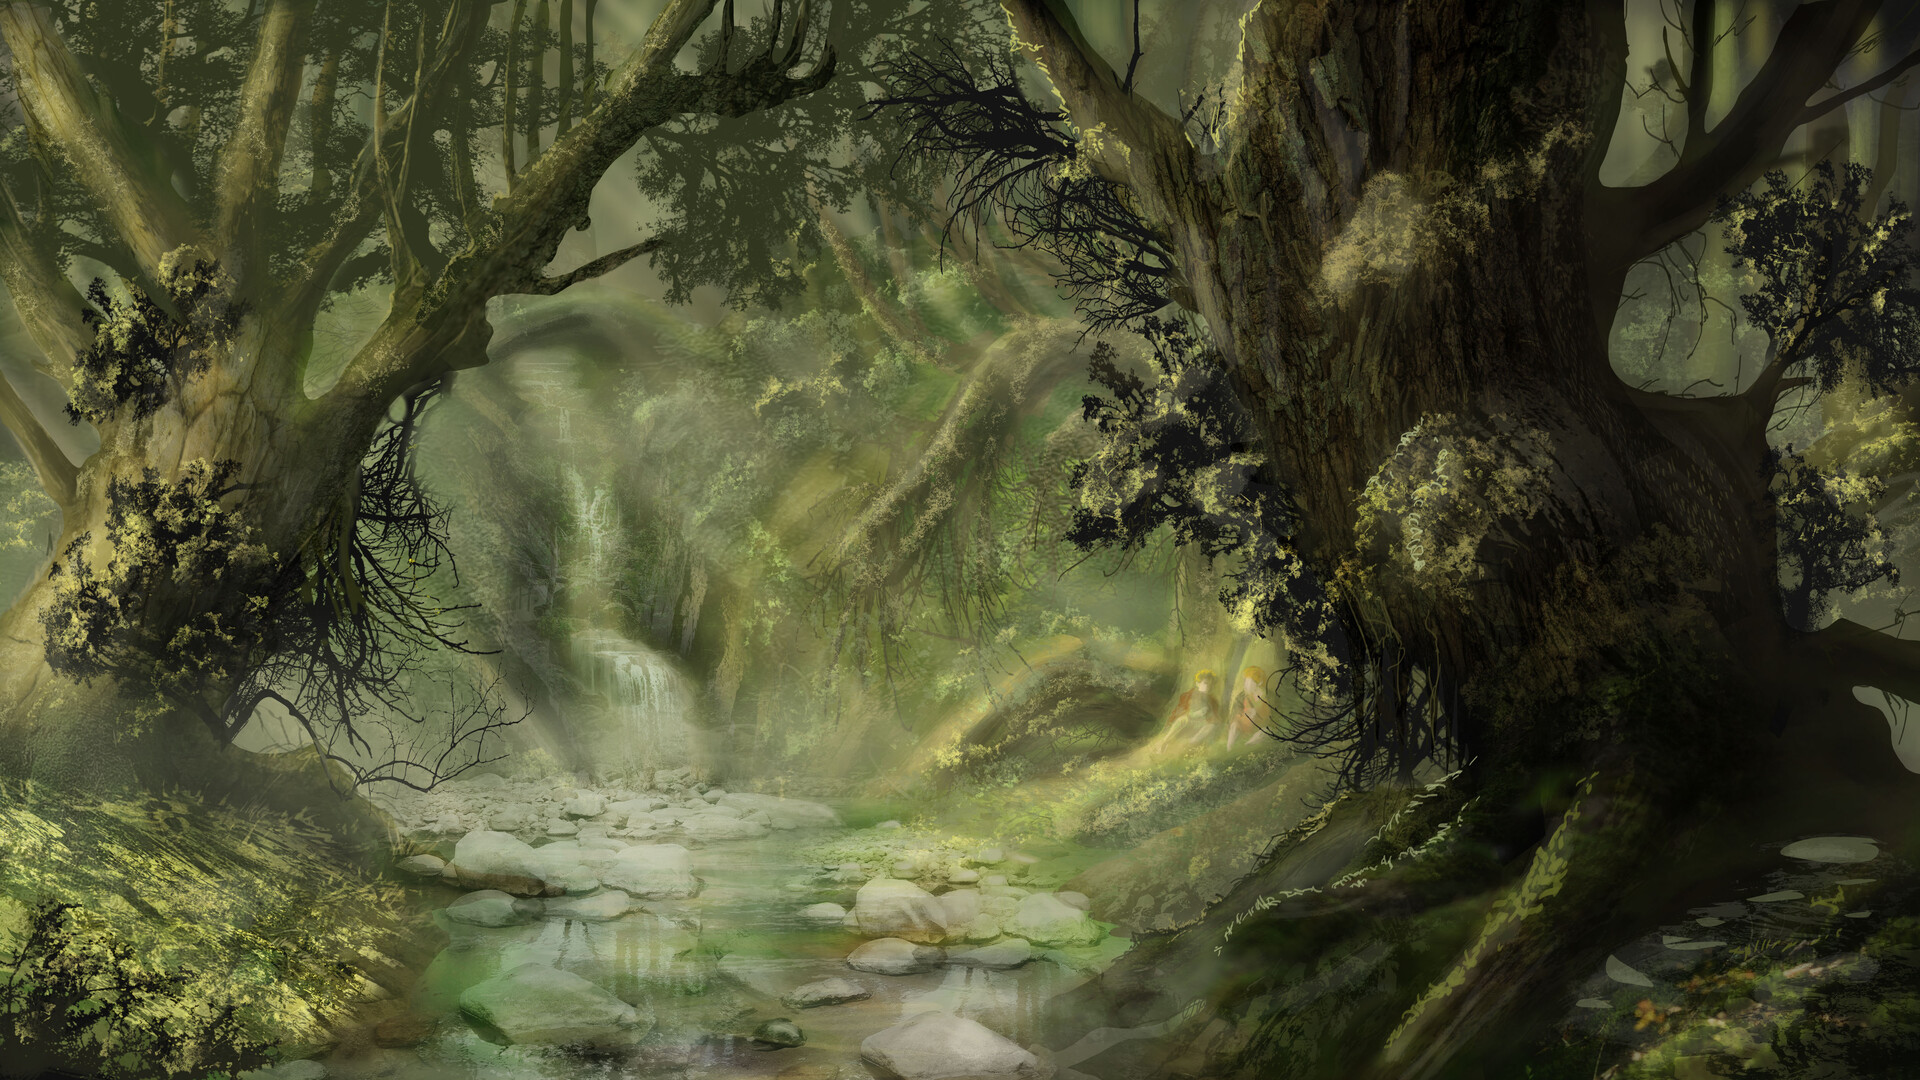 ArtStation - Lord of the Rings: Gollum - Path through the Mirkwood Forest